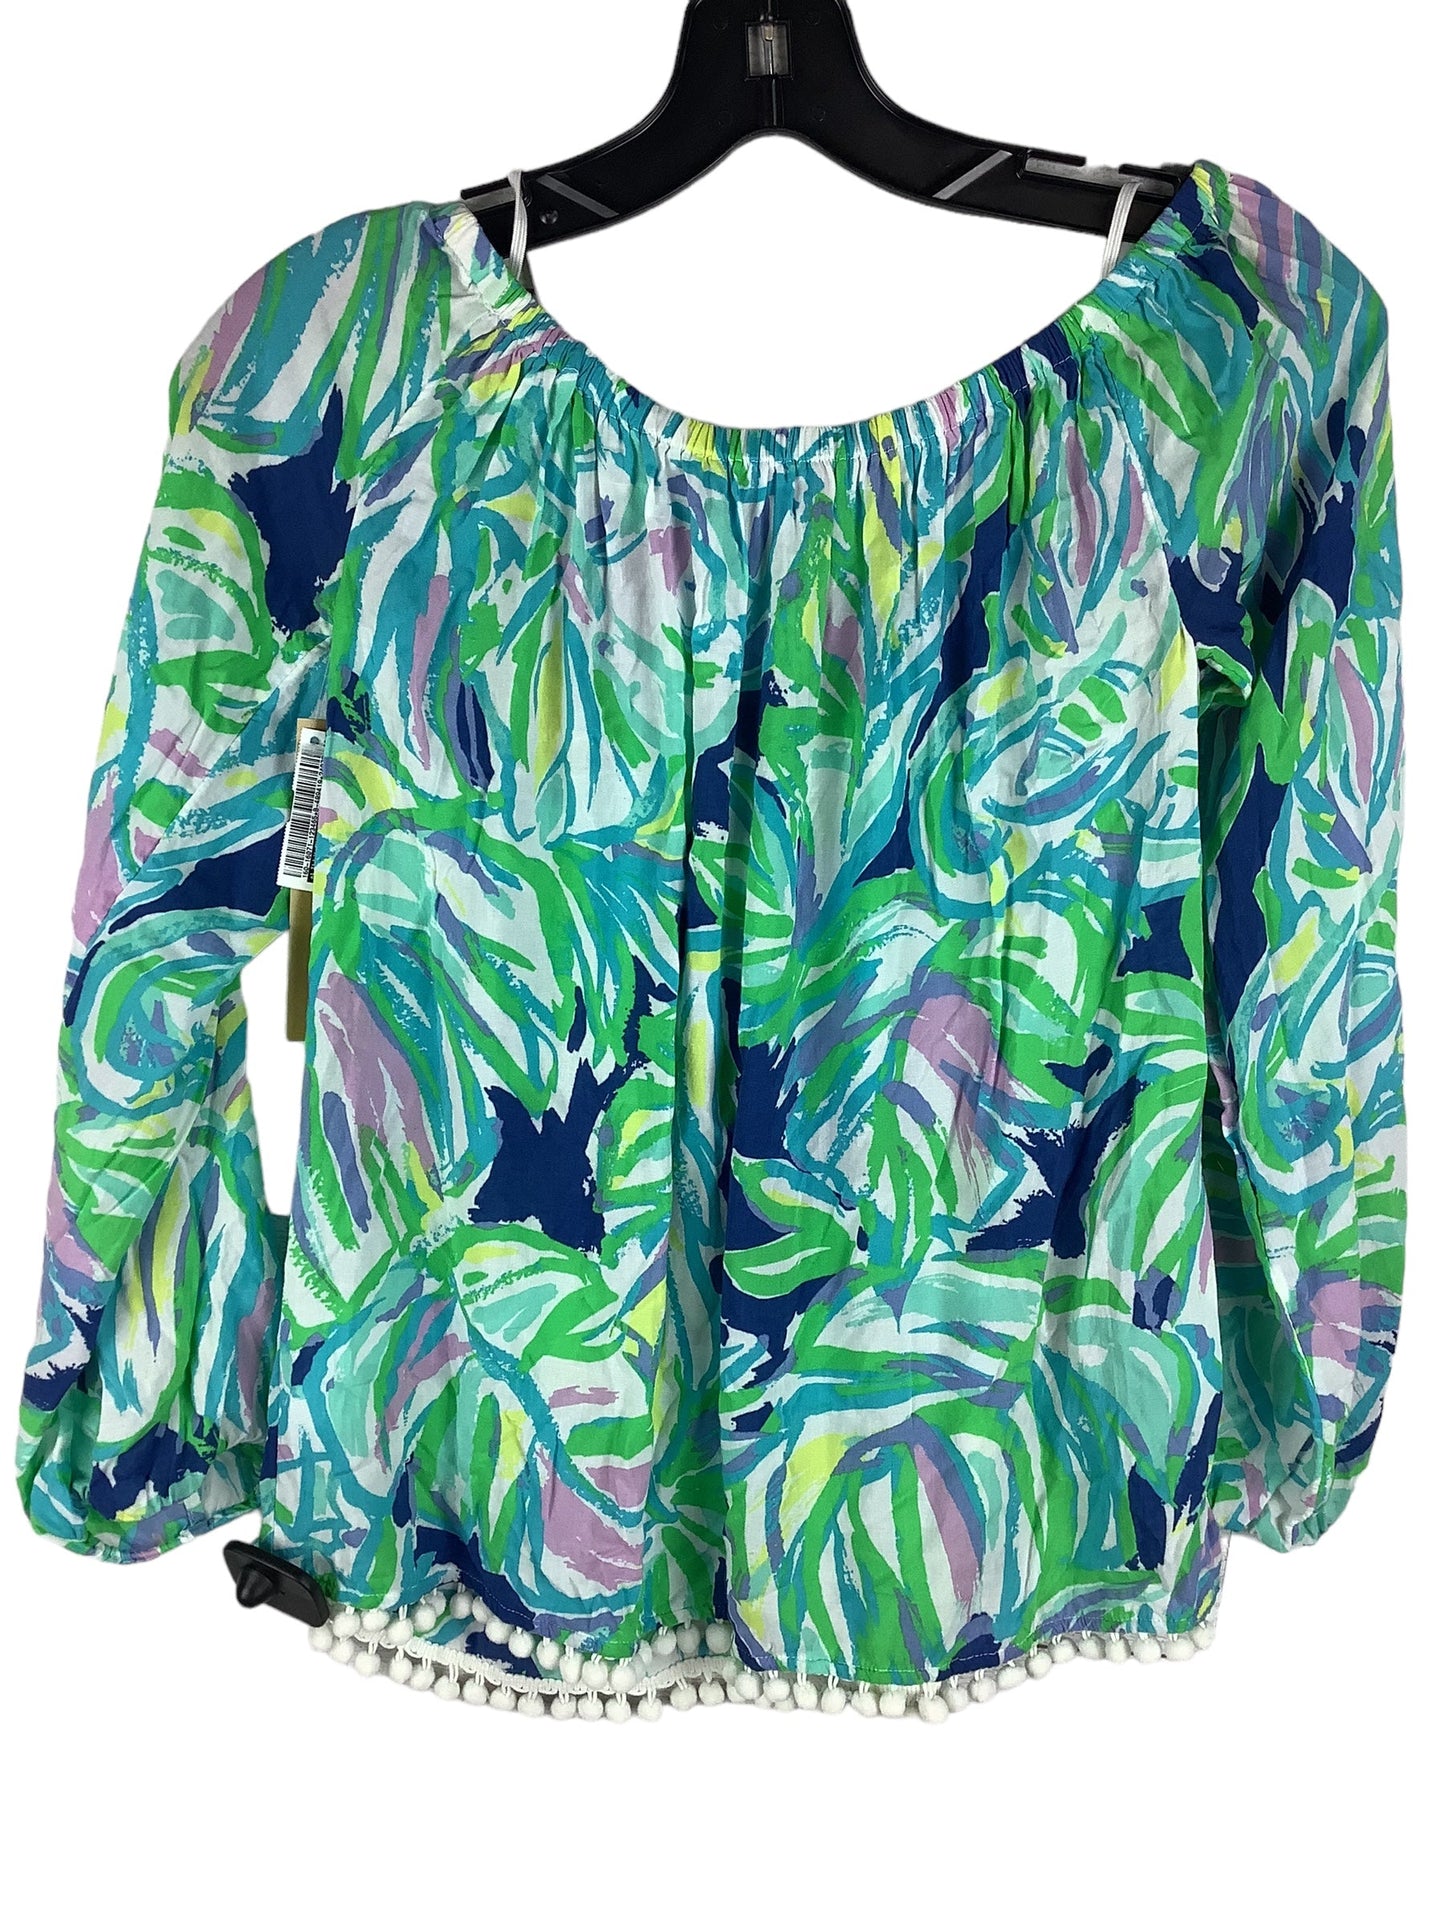 Blue & Green Top Long Sleeve Designer Lilly Pulitzer, Size Xs